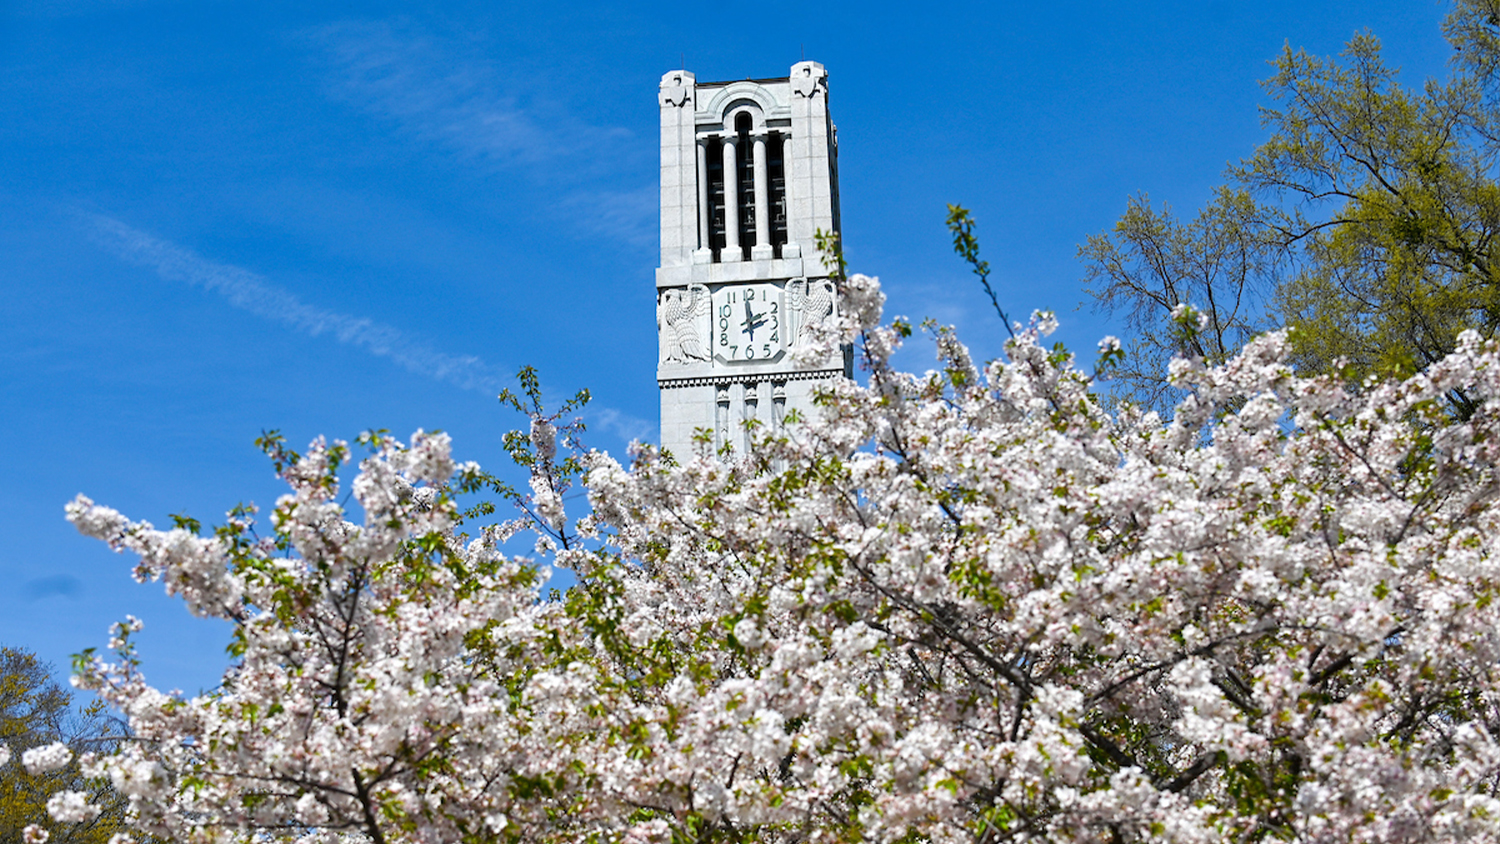 White flowers bloom on a tree in front of the Bell Tower